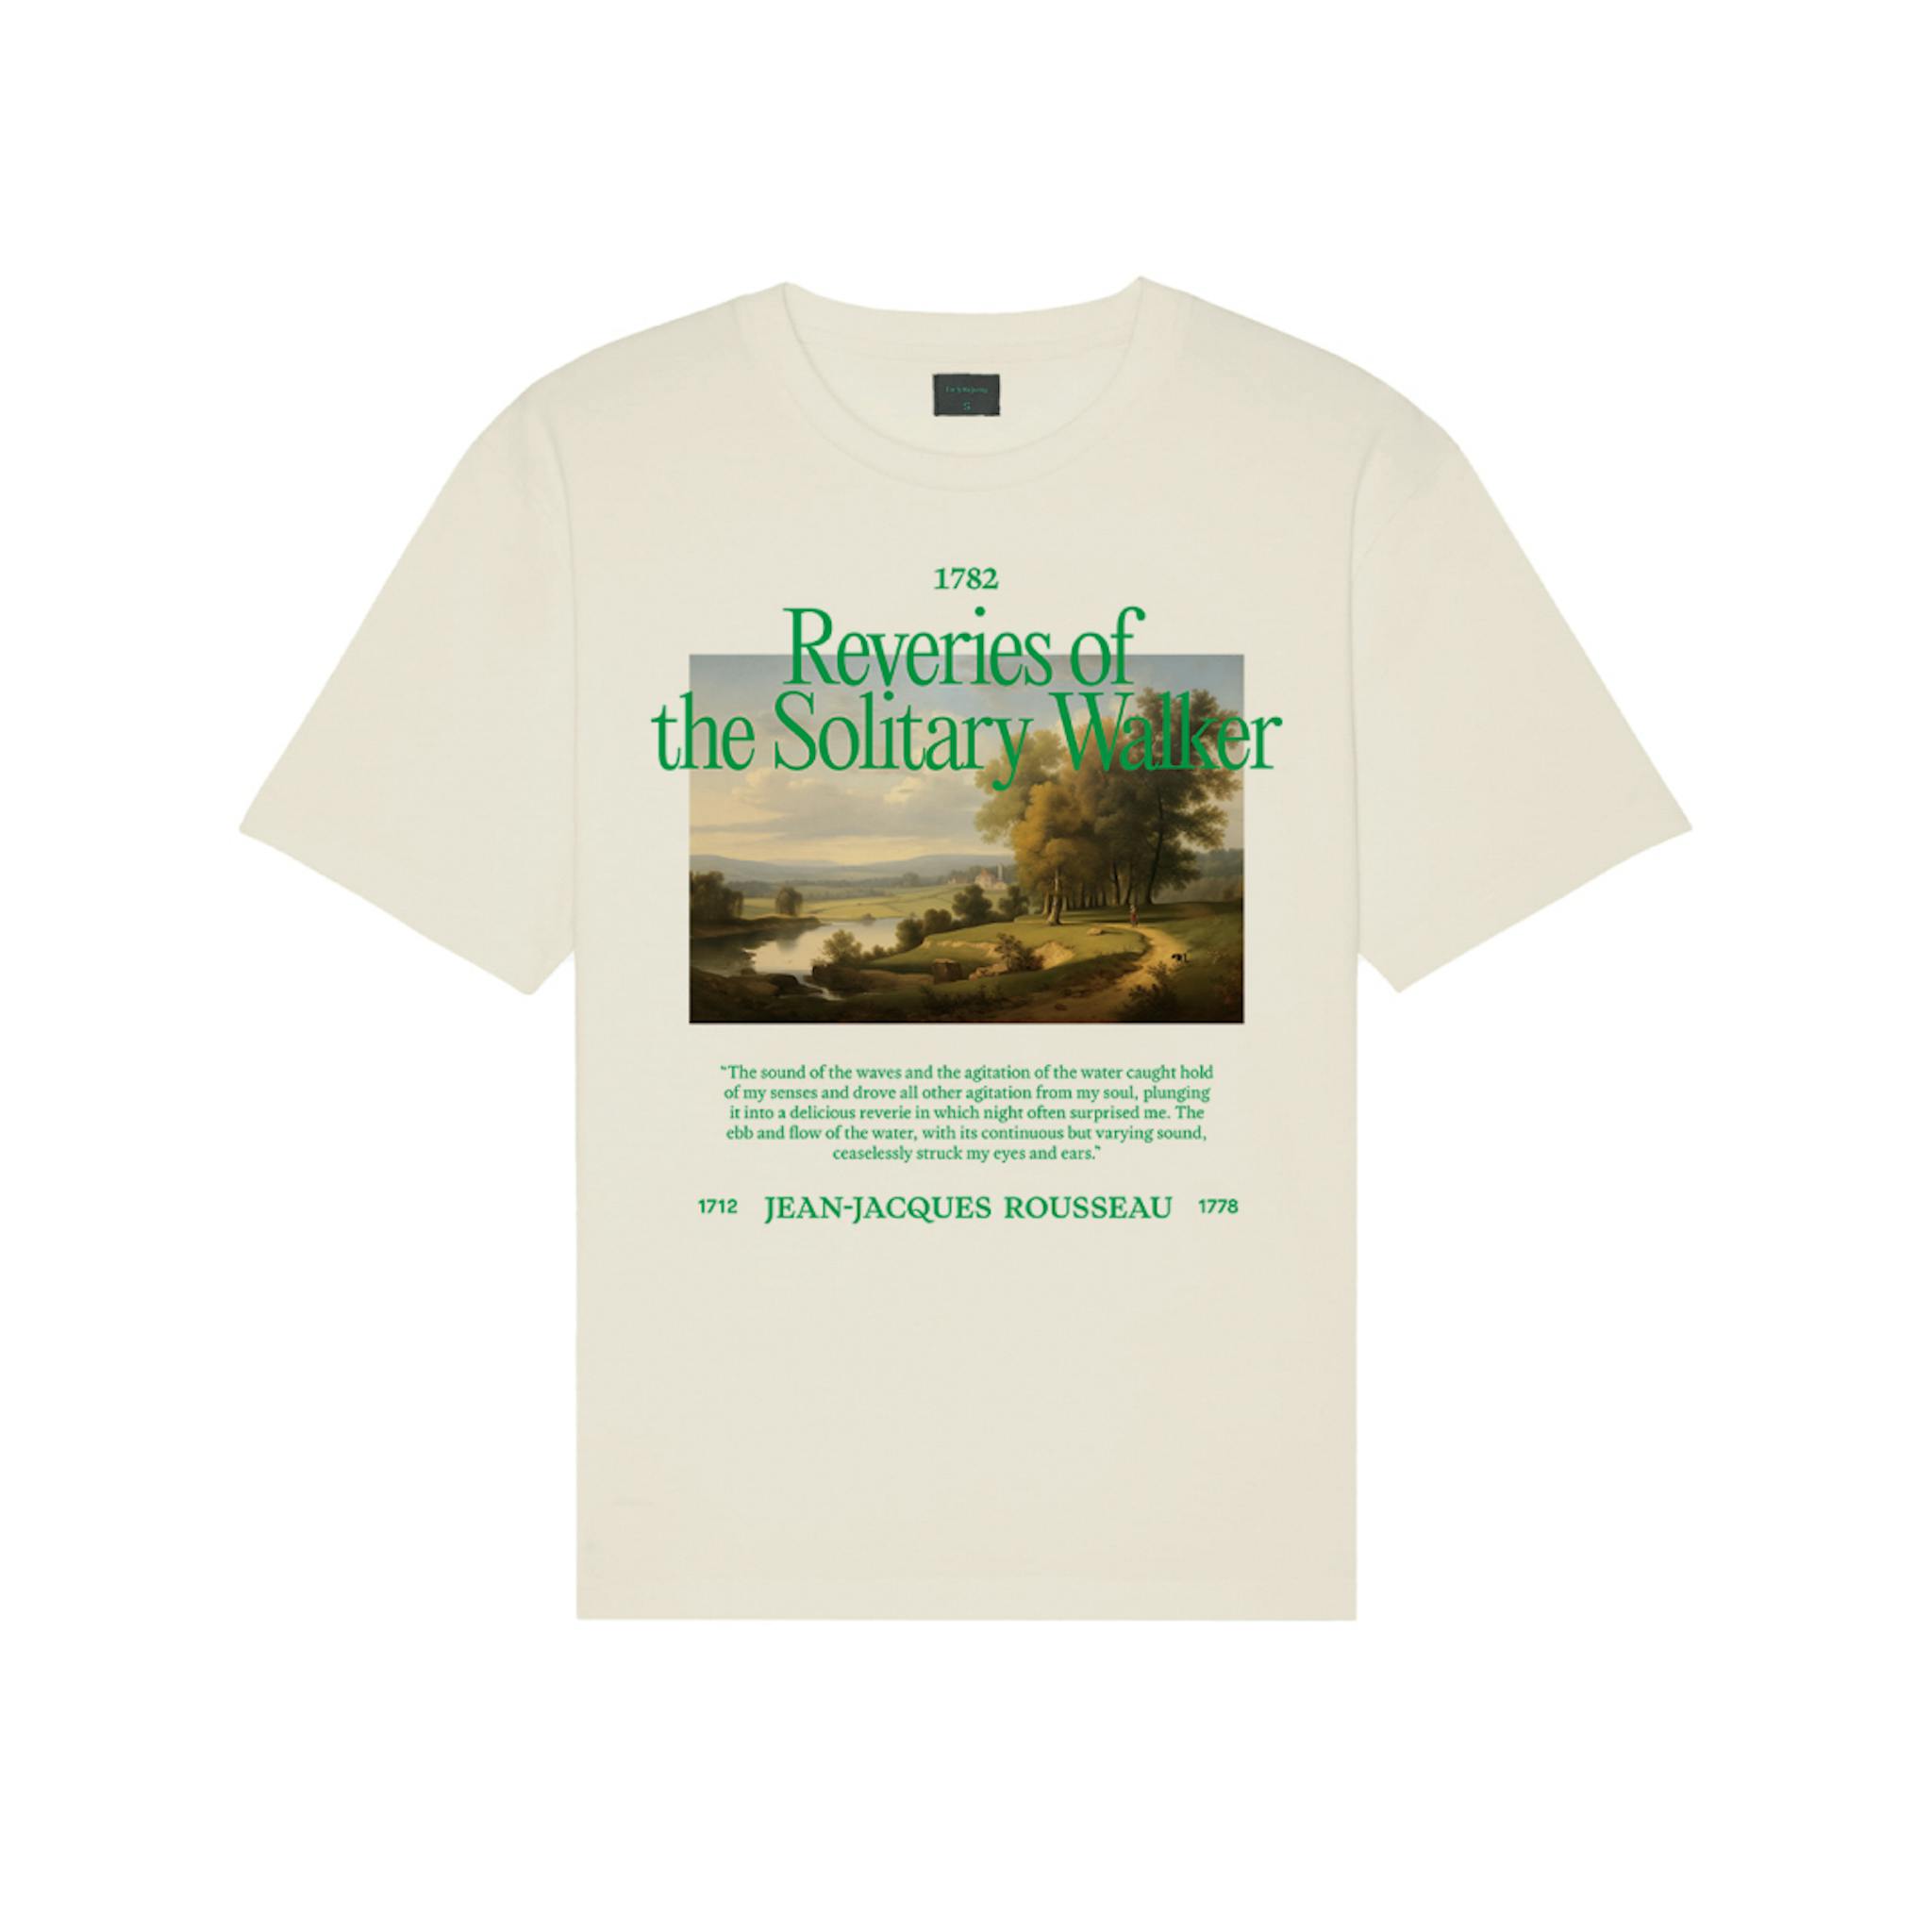 A cream-colored short-sleeved shirt with a landscape painting and green text above it, and a quote below it. 